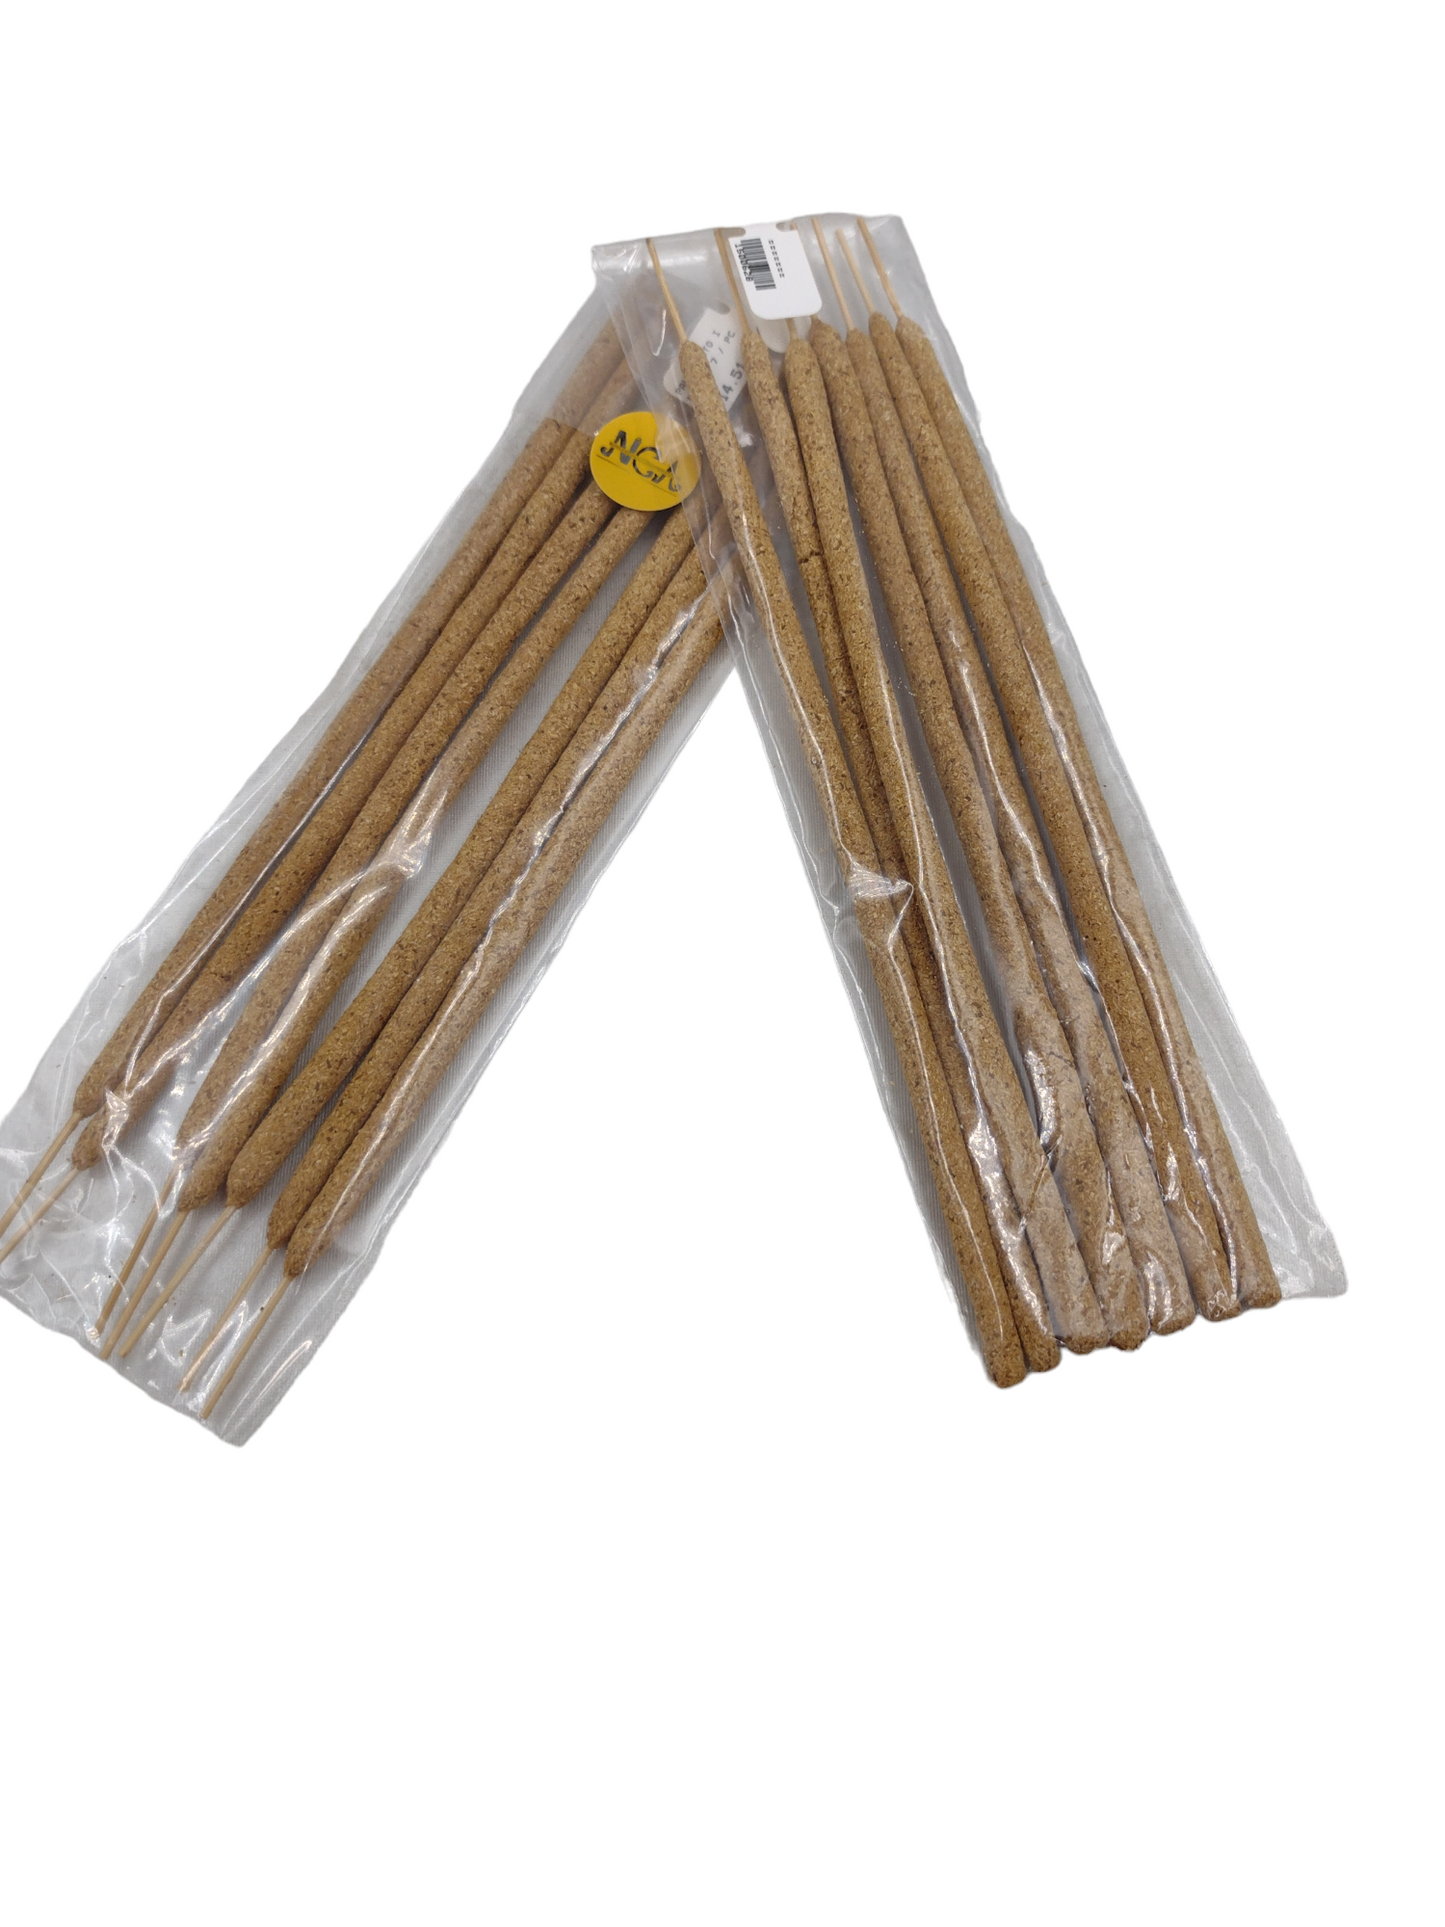 Palo Santo Incense Sticks 7 Pack - Premium Authentic from Peru ( Free Shipping )